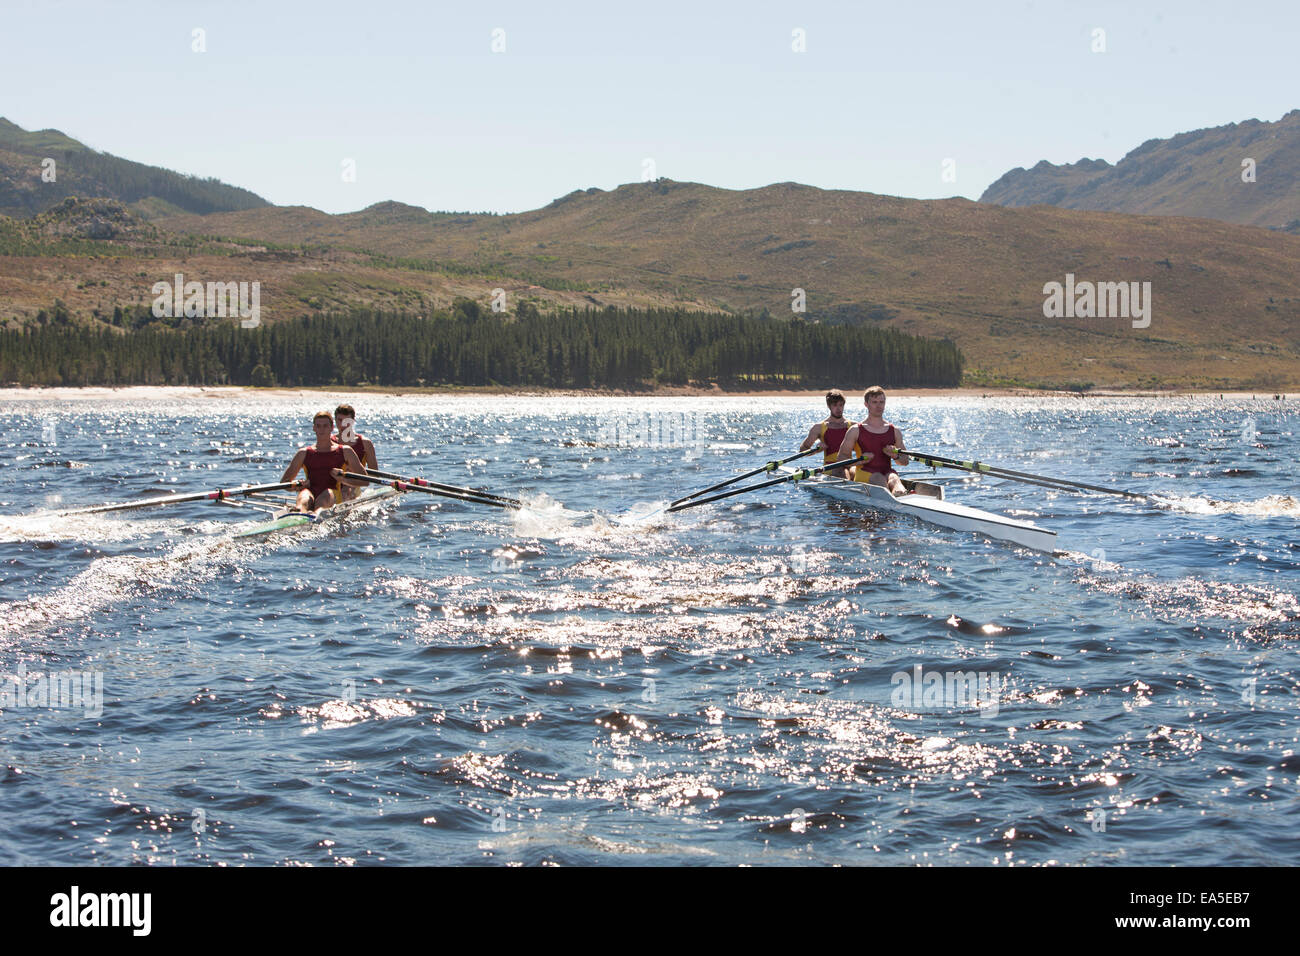 Two double scull rowing boats in water Stock Photo